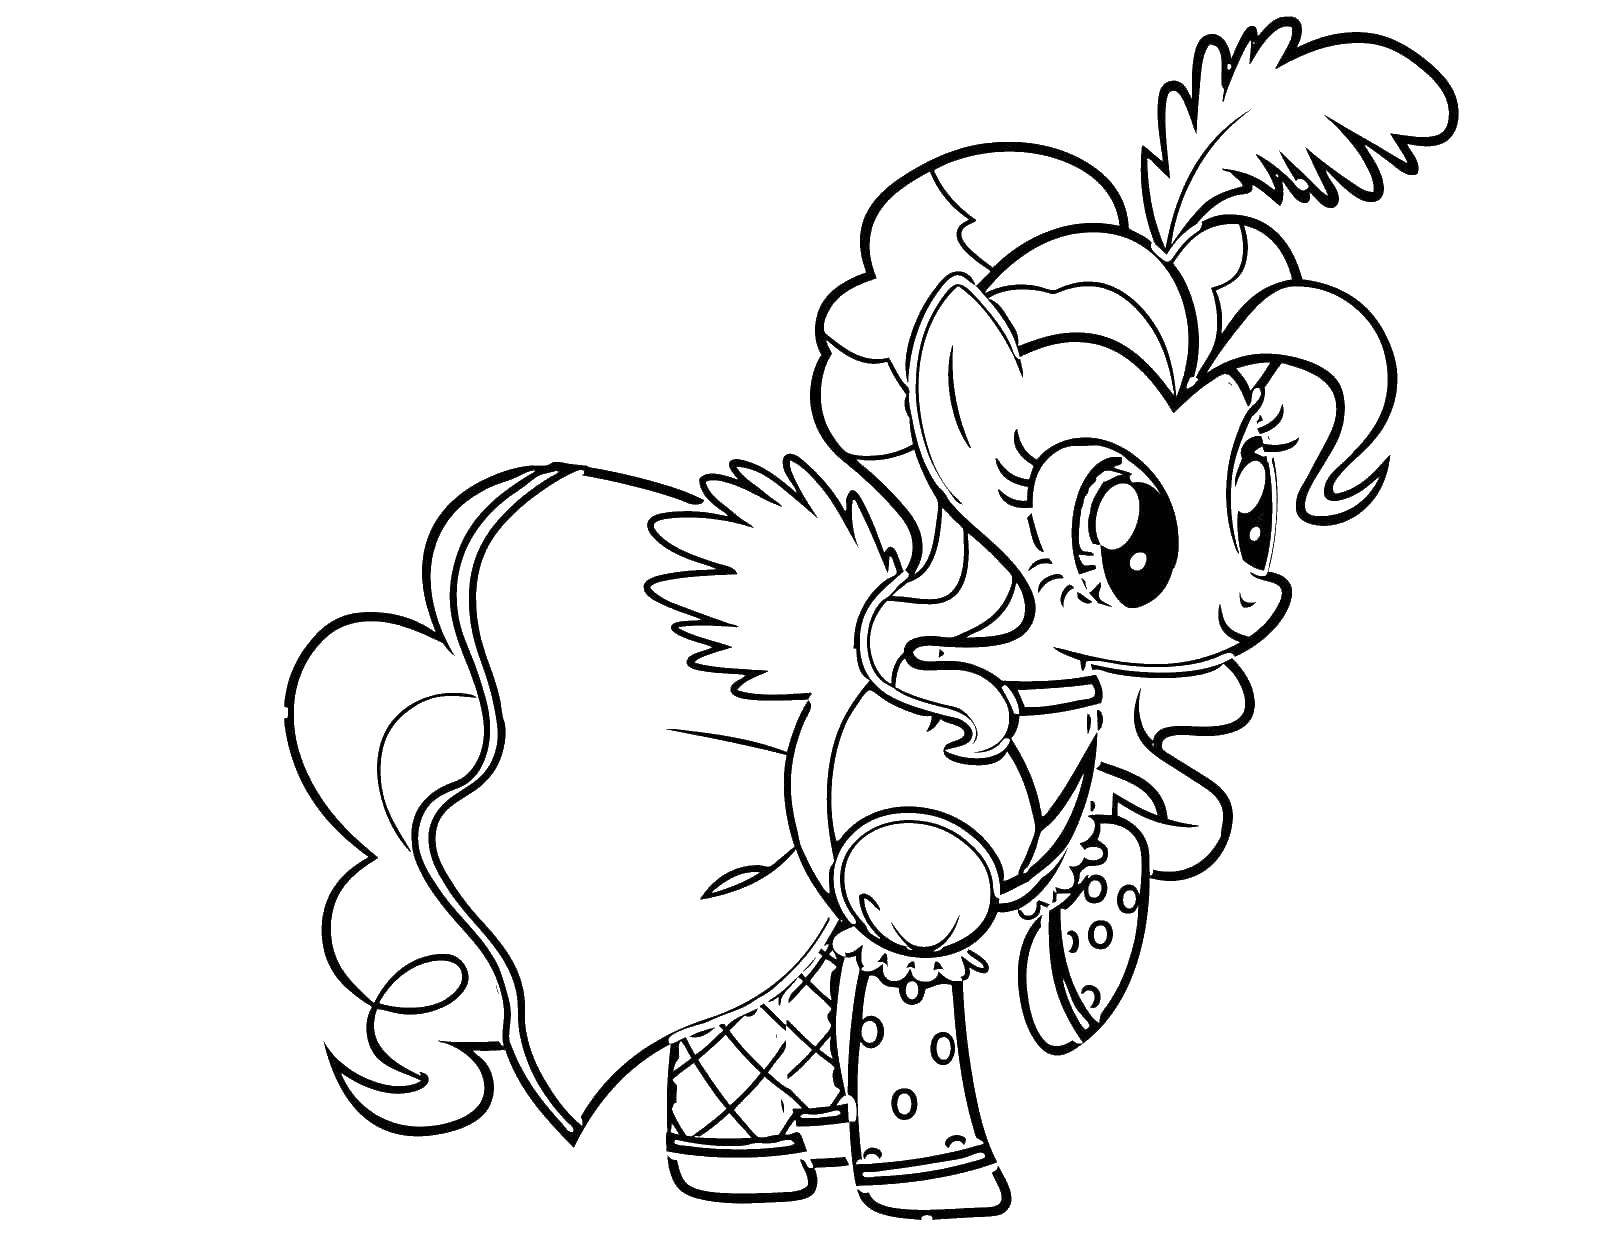 Coloring Pinkie in a dress. Category my little pony. Tags:  pony, Pinkie.